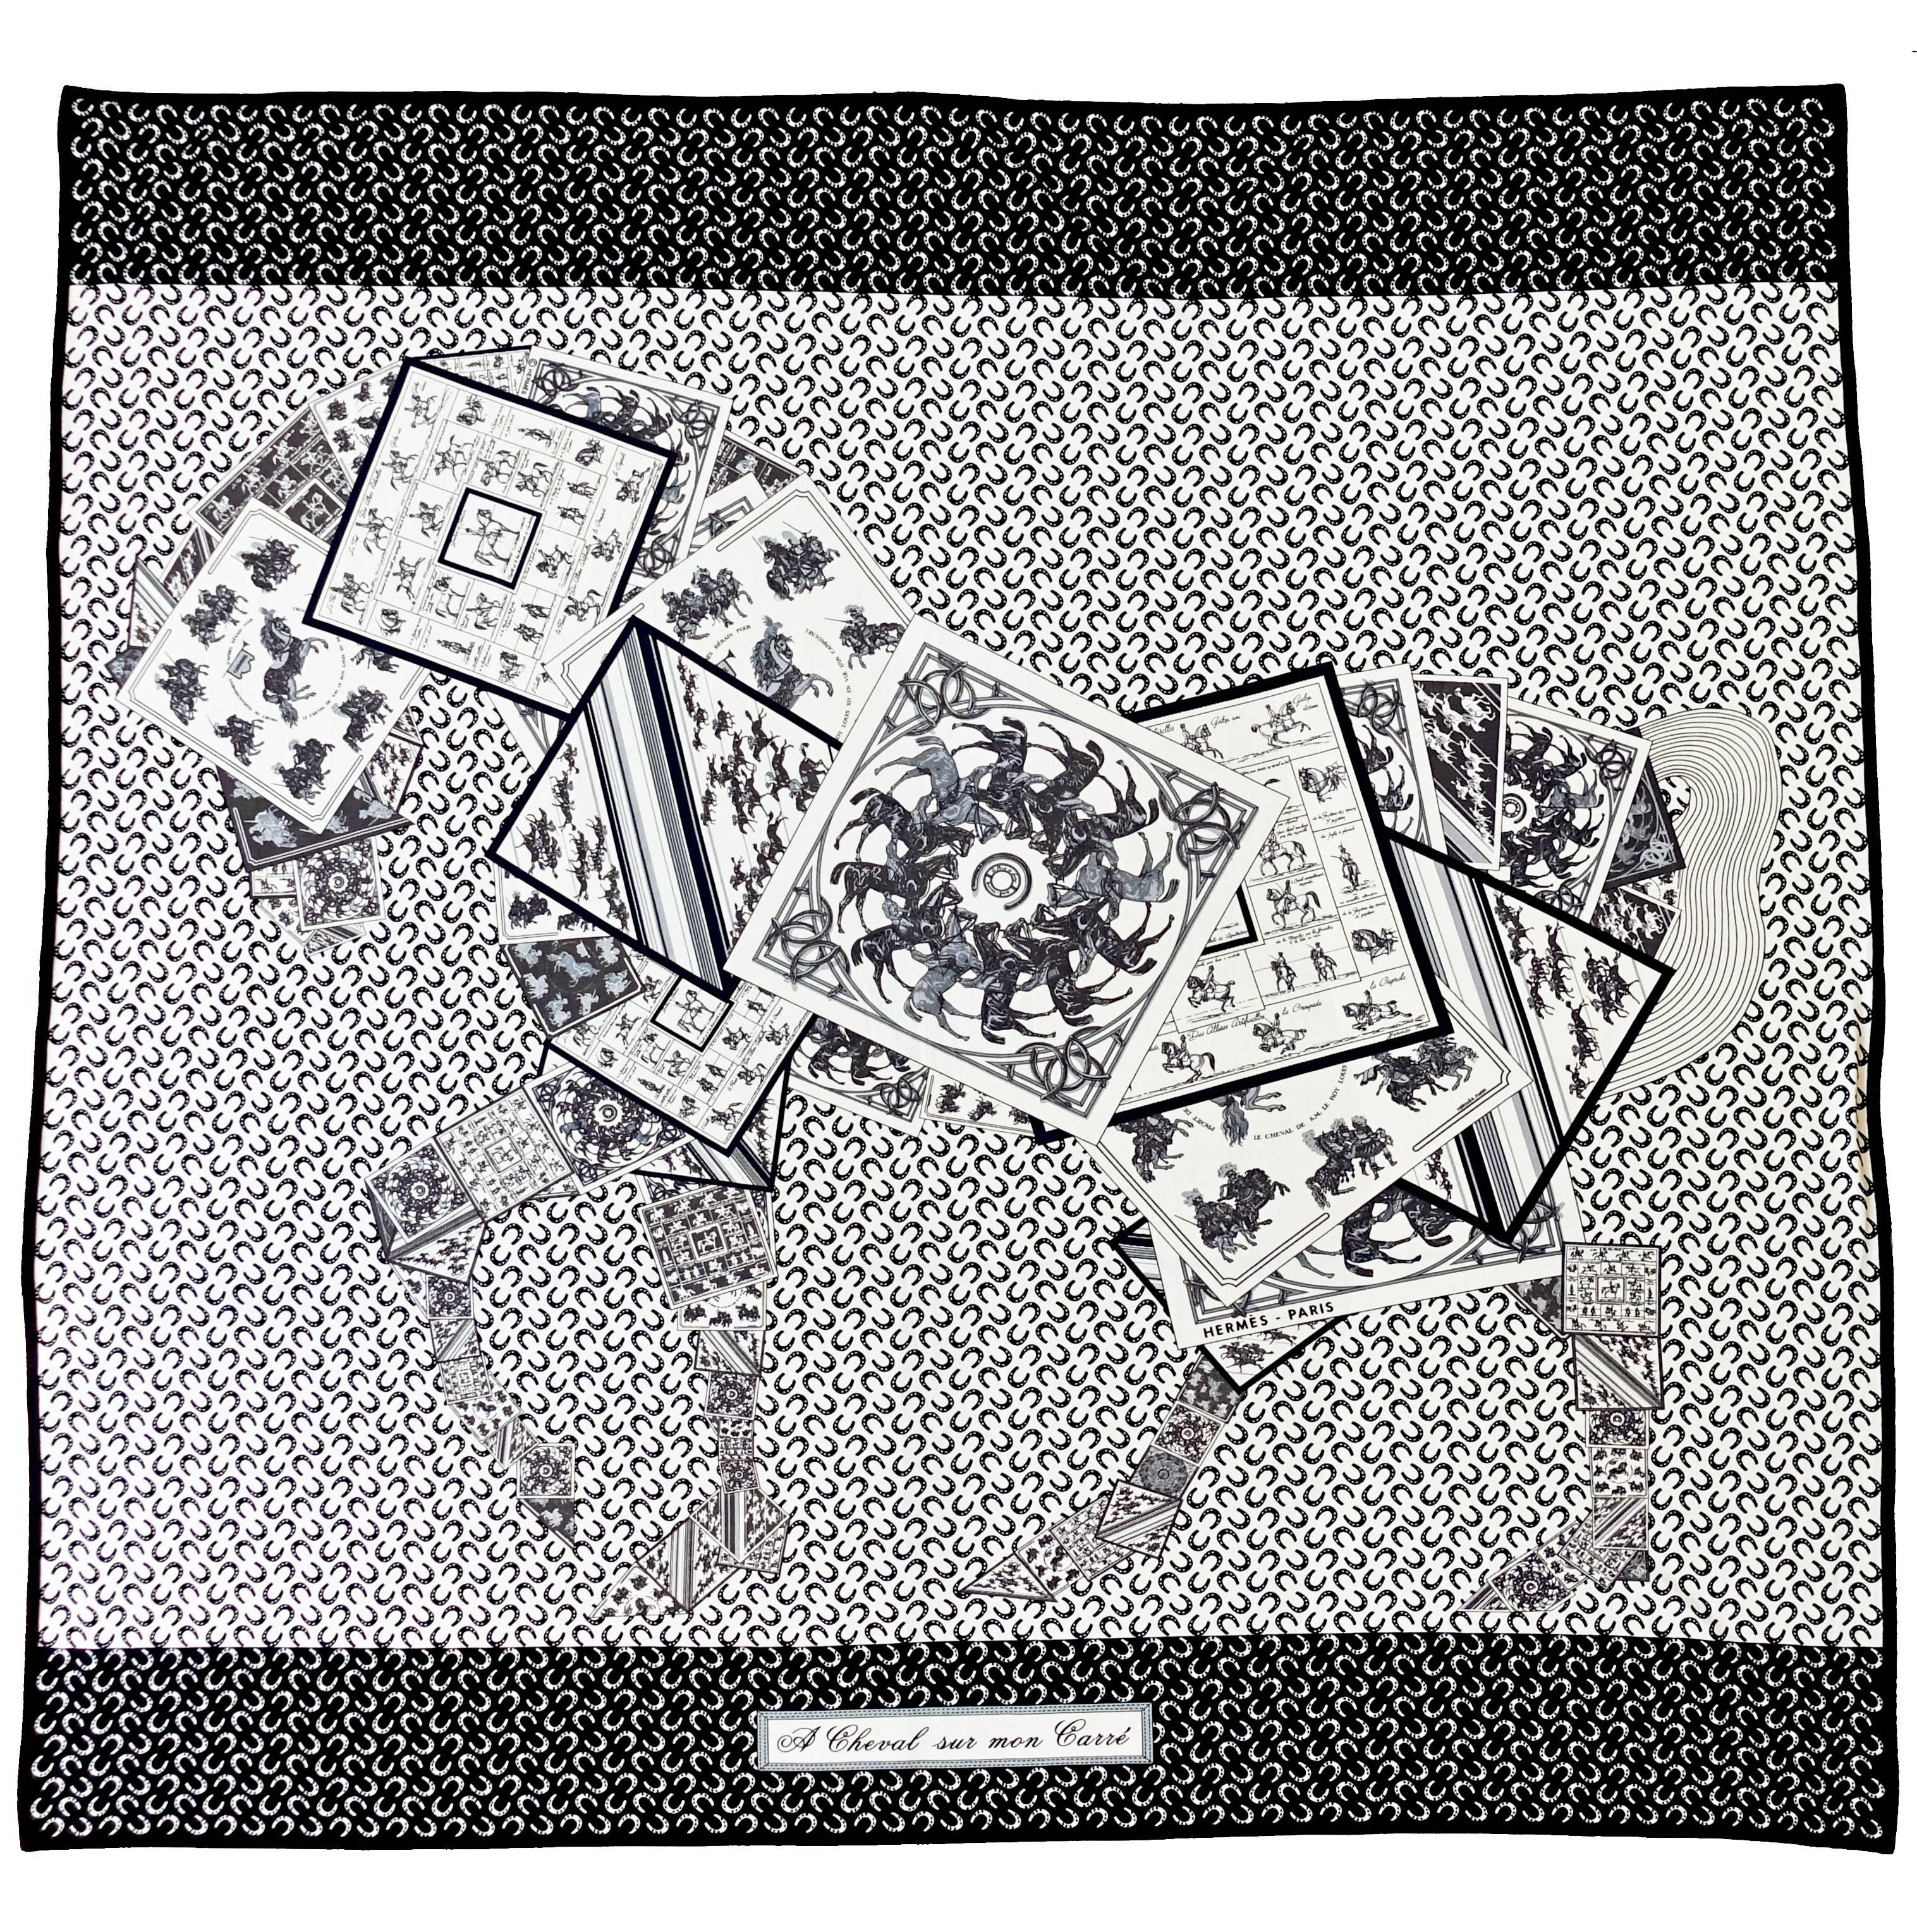 Hermes A Cheval Sur Mon Carre Silk Jersey Scarf 90cm
Brand New in Box.  Pristine Condition.  Never Worn.
Perfect gift!  Comes with Hermes box and ribbon.
Grail Alert!  
A Cheval Sur Mon Carre is well known to be an impossible find in the Black and